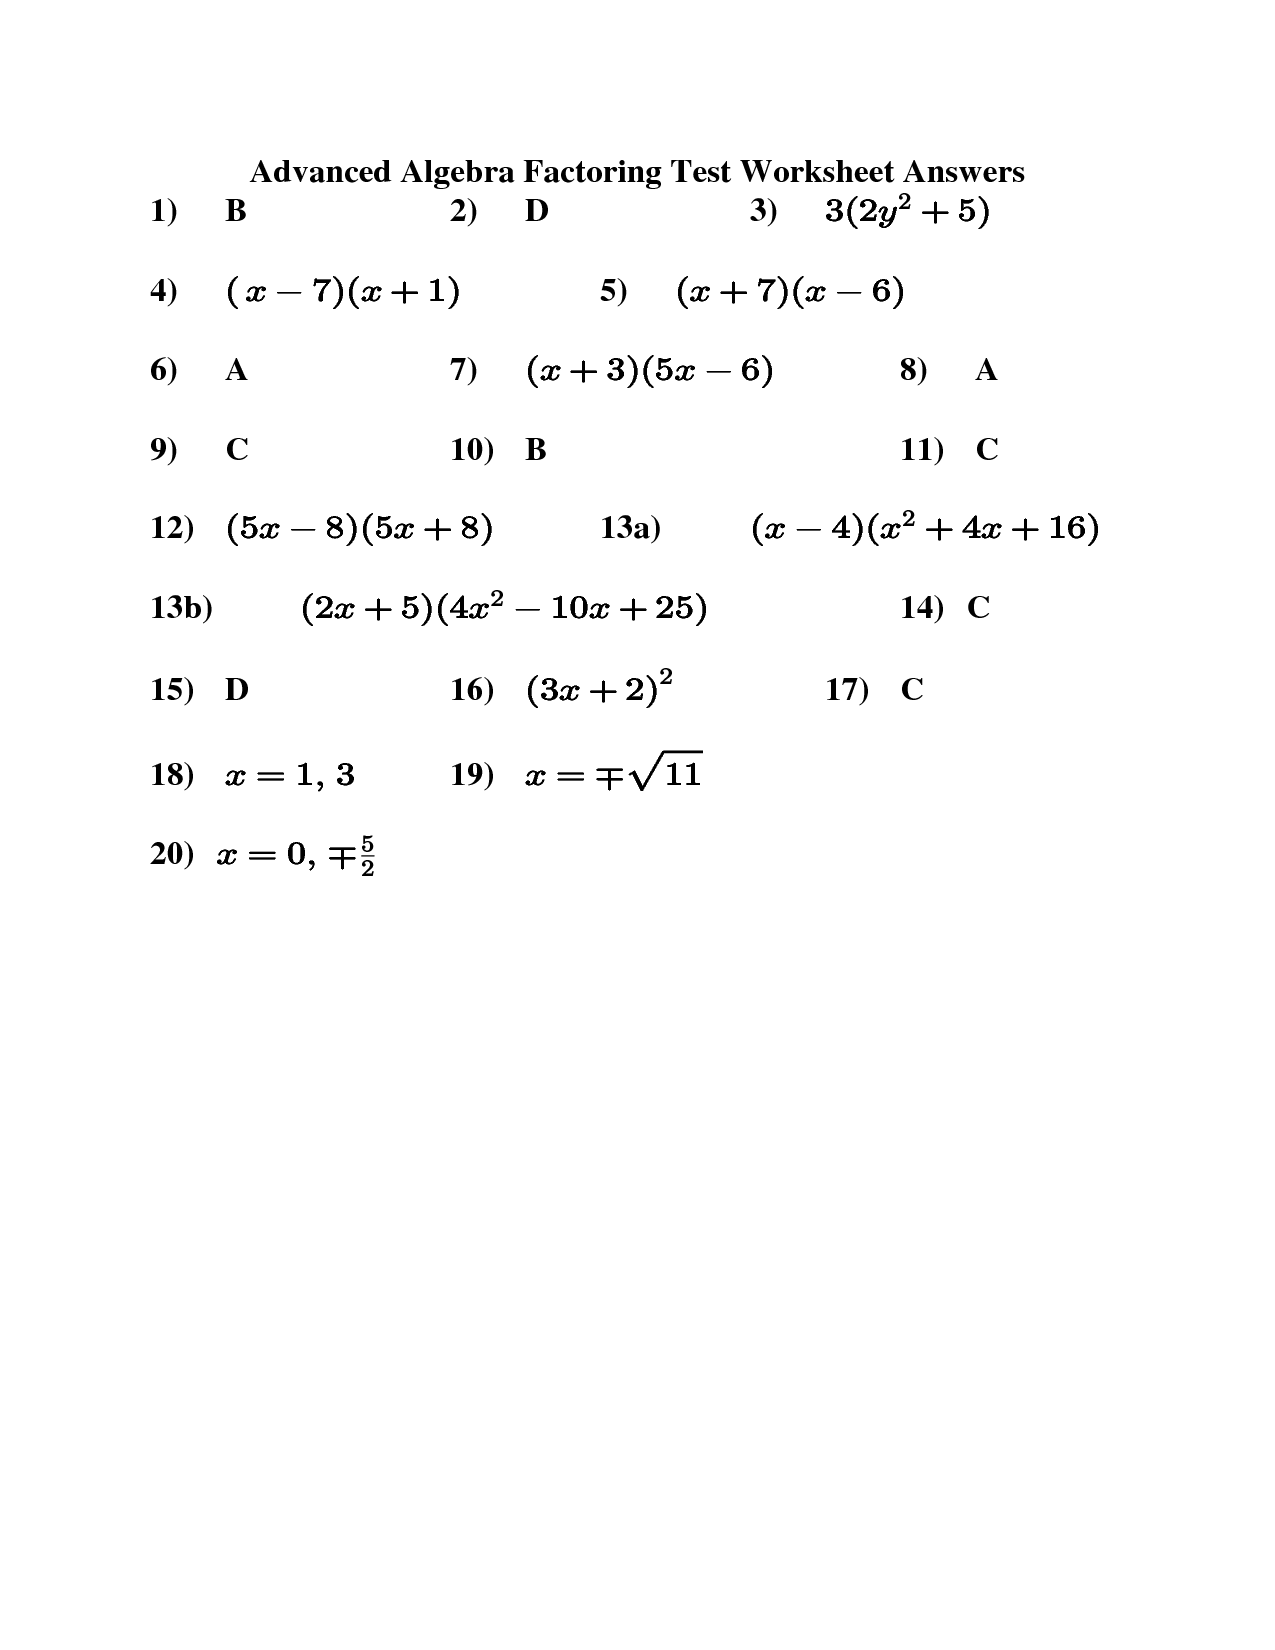 Algebra 2 Worksheets with Answers Image